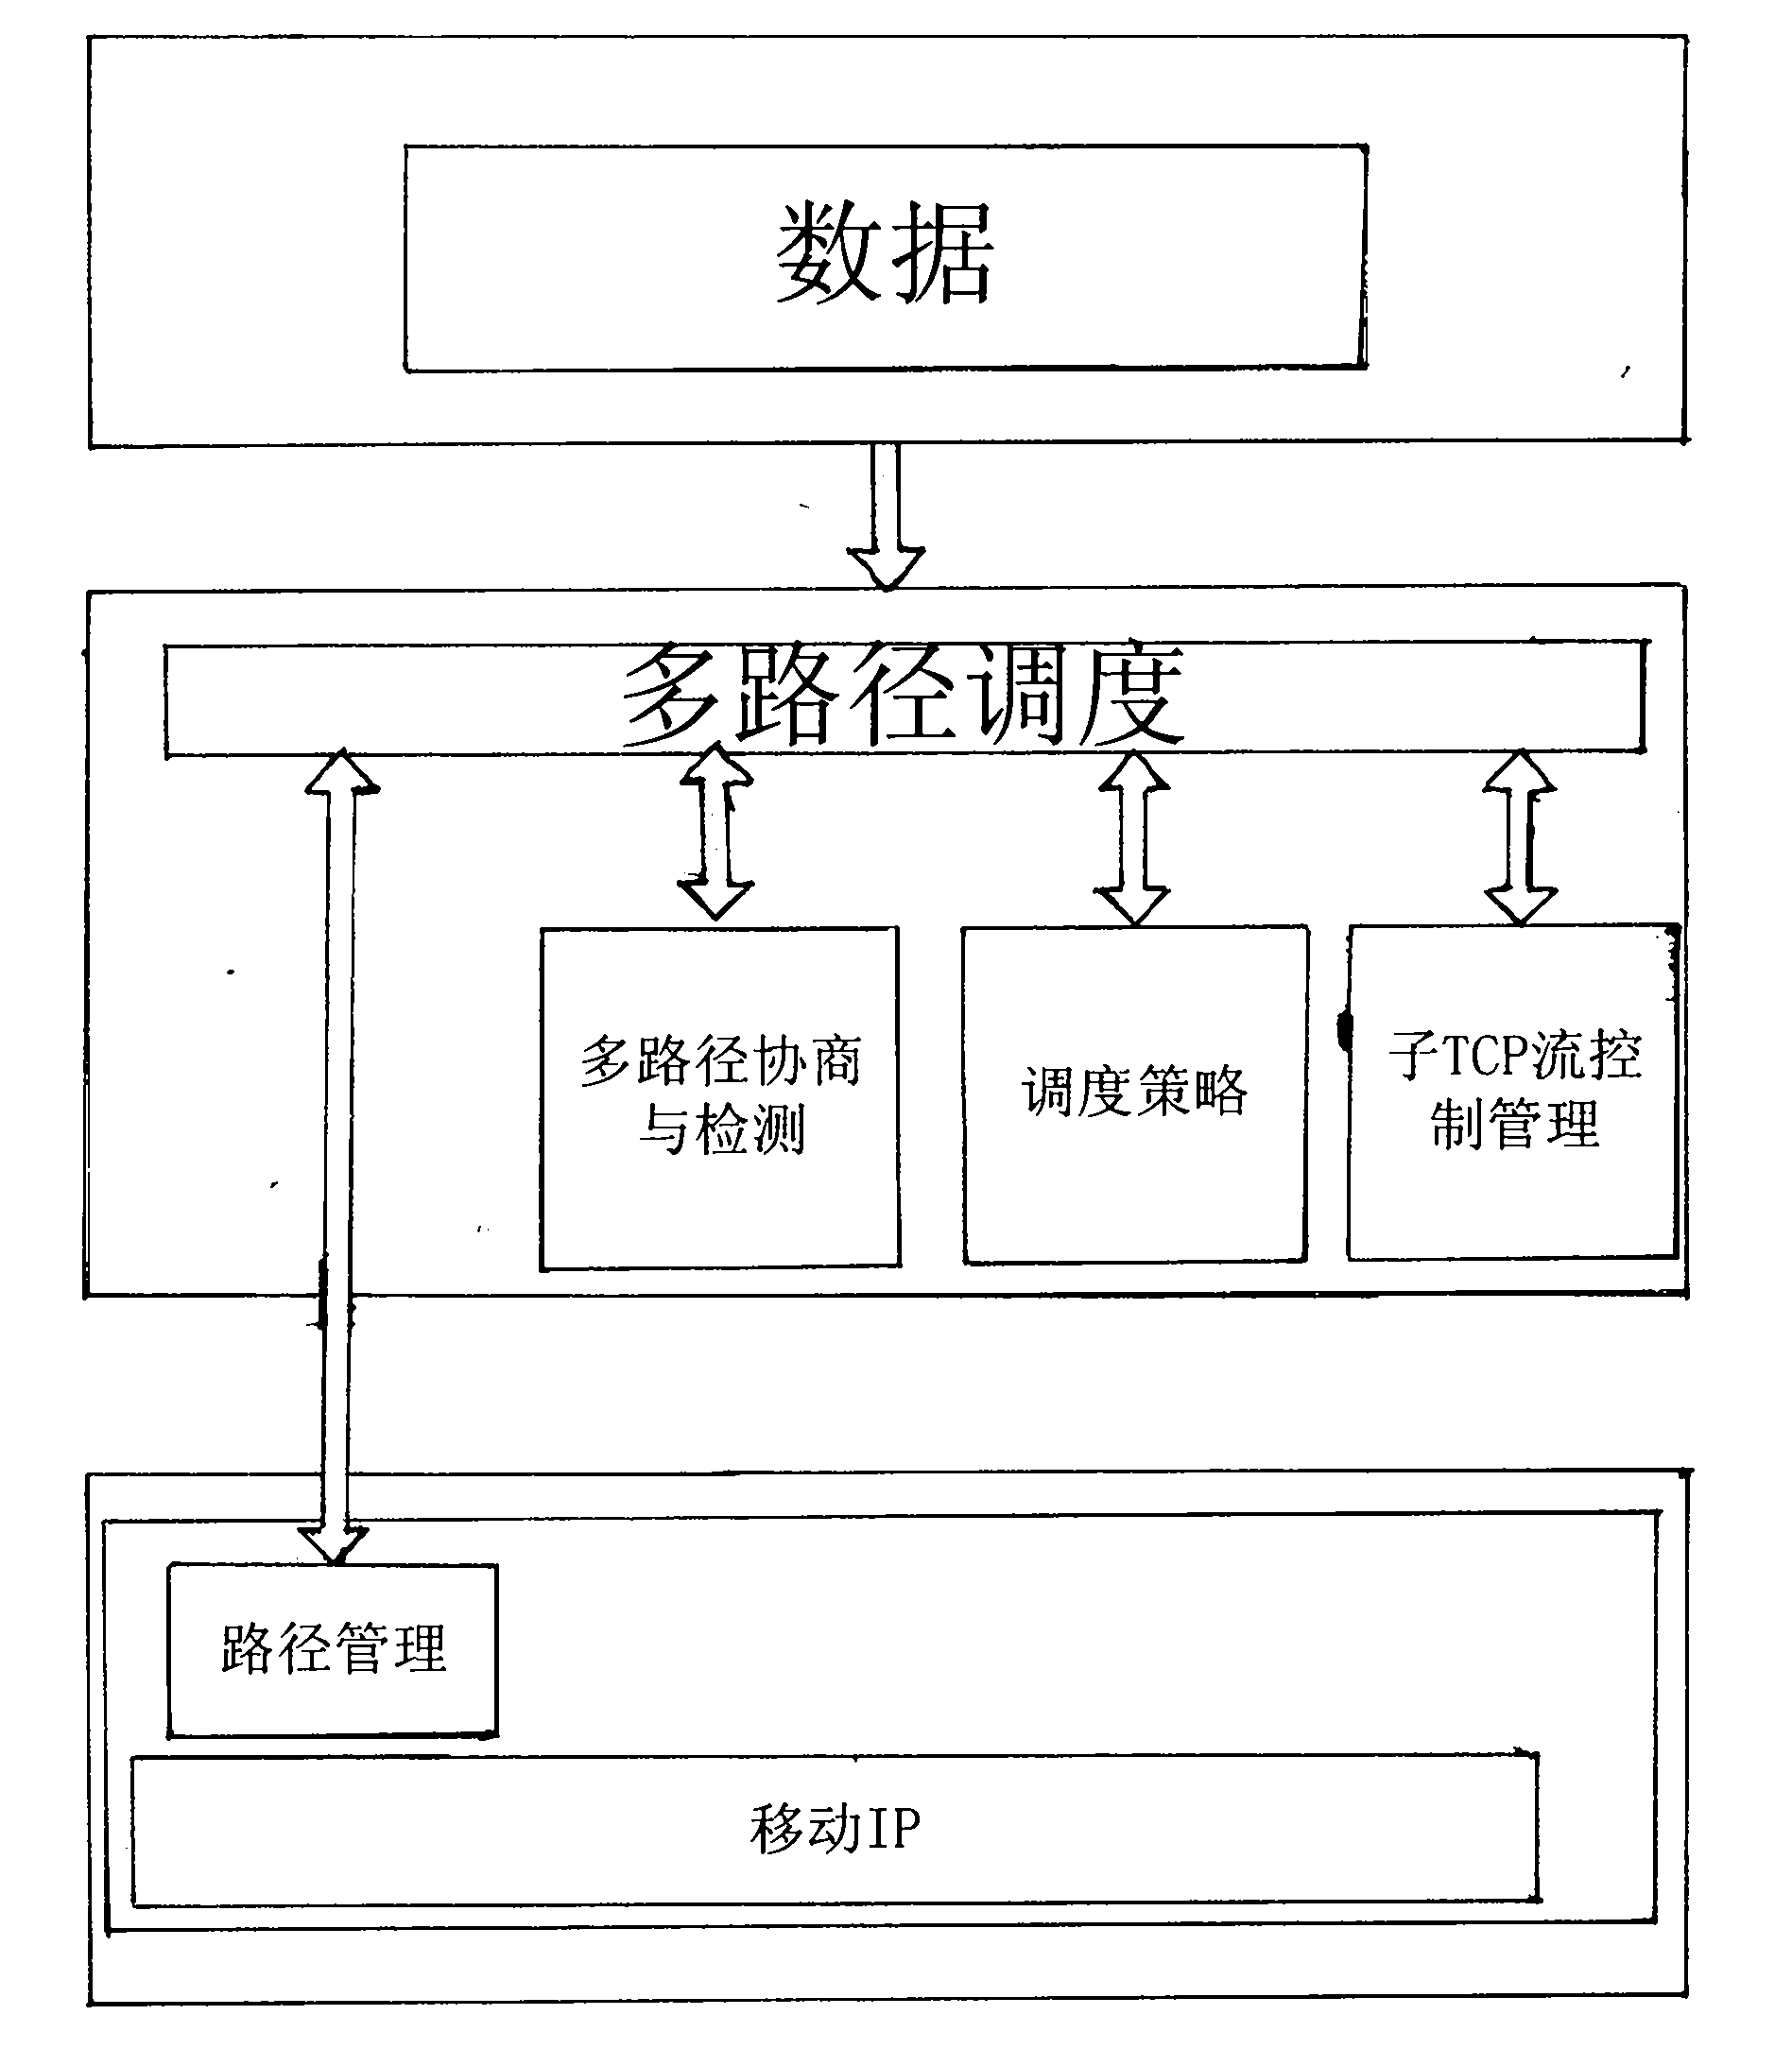 Method of multipath TCP having mobility and combined with mobile IP (internet protocol)